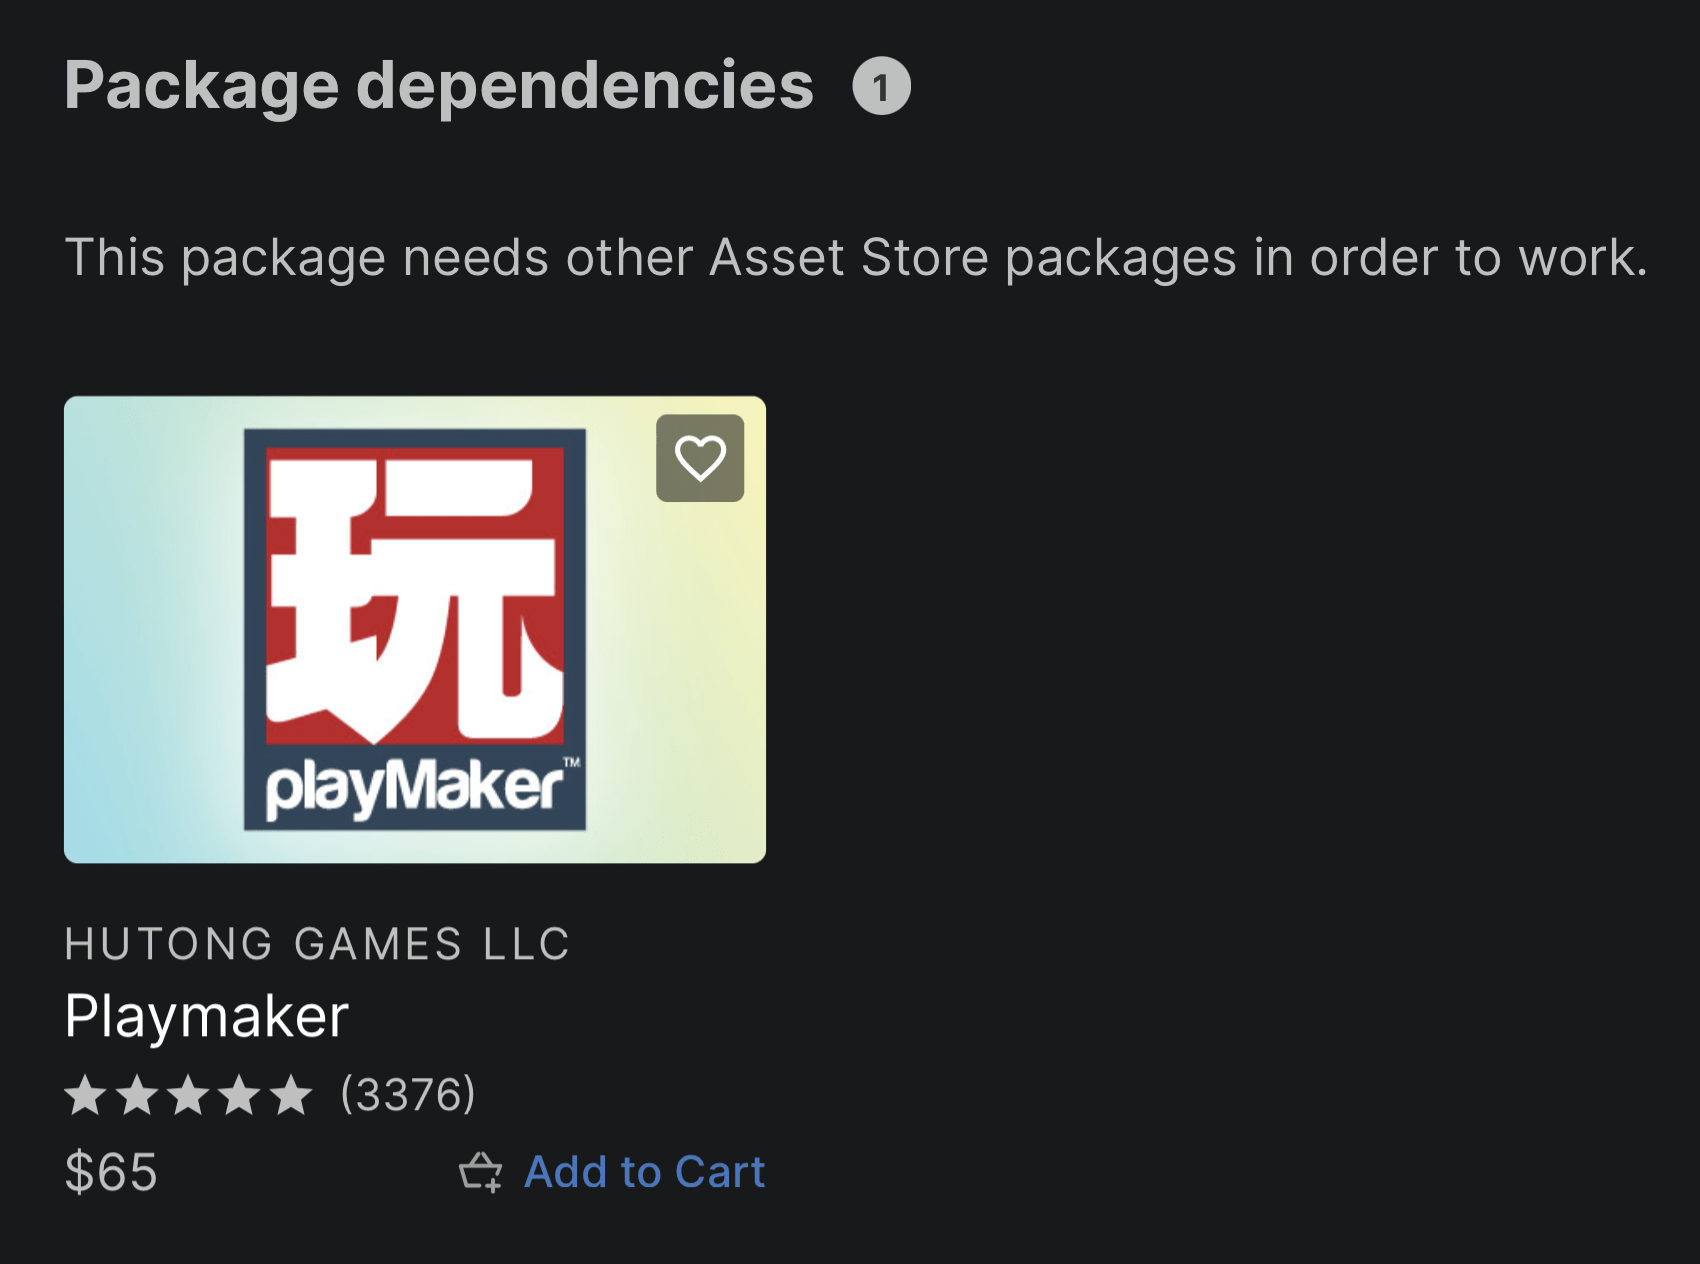 Unity Asset Store product pages have a separate native section called “Package dependencies” for Modular Assets.